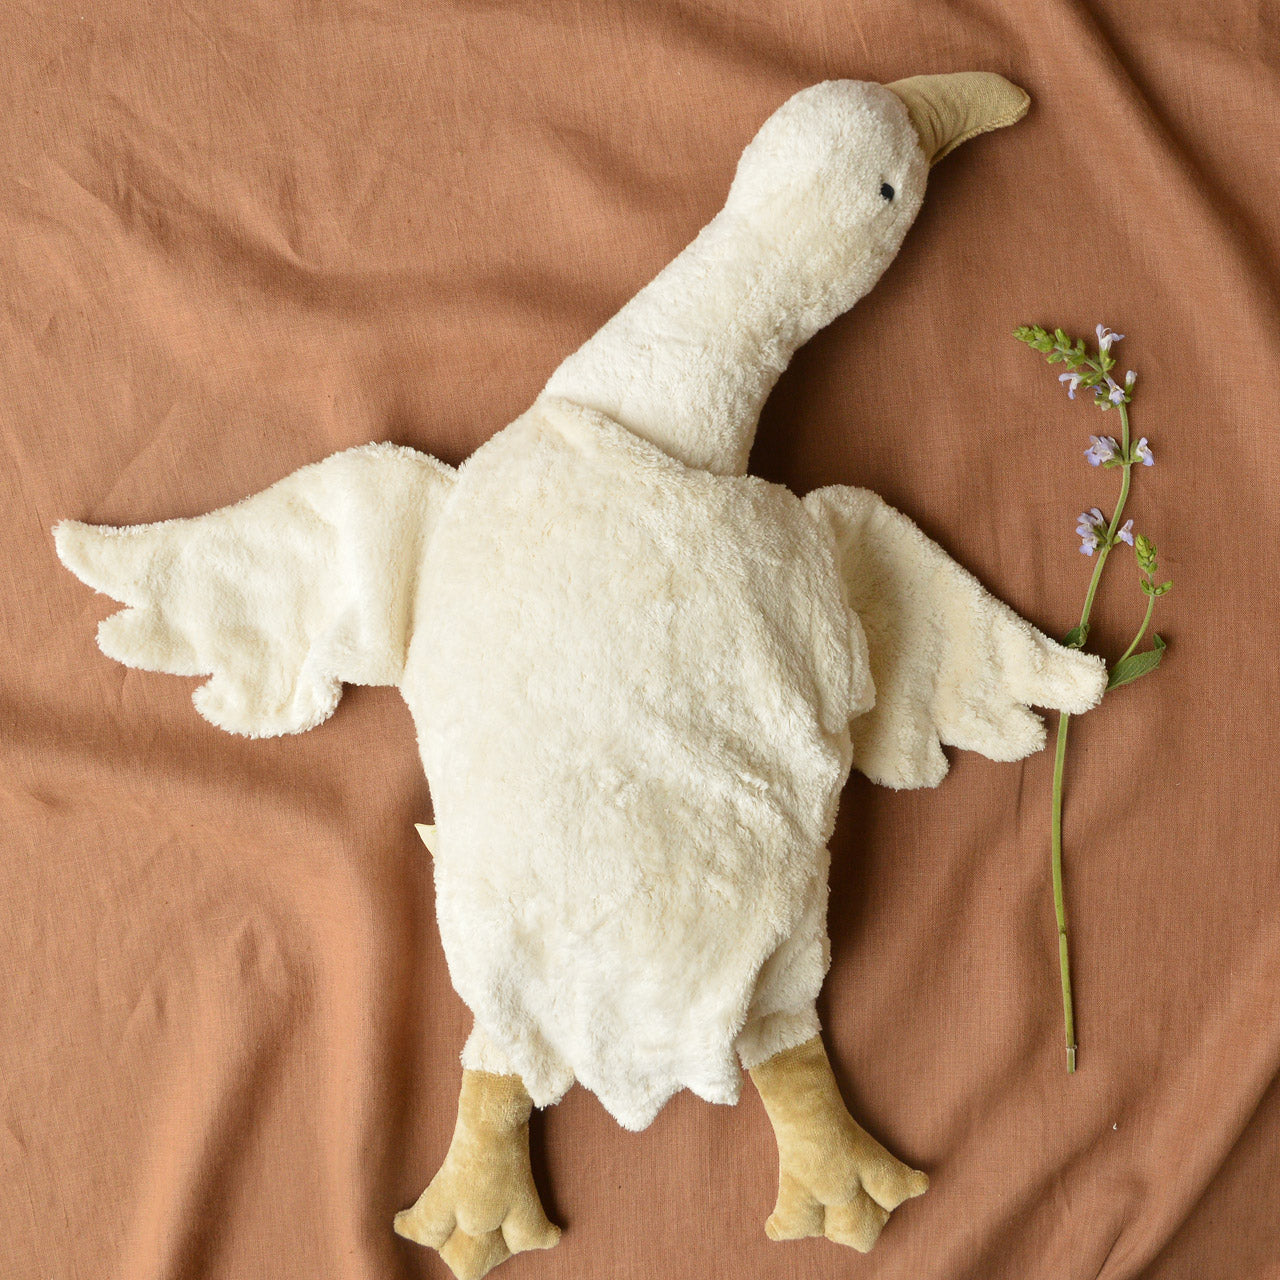 Cuddly Goose Toy/Heat Pack in Organic Cotton/Lambswool - Large